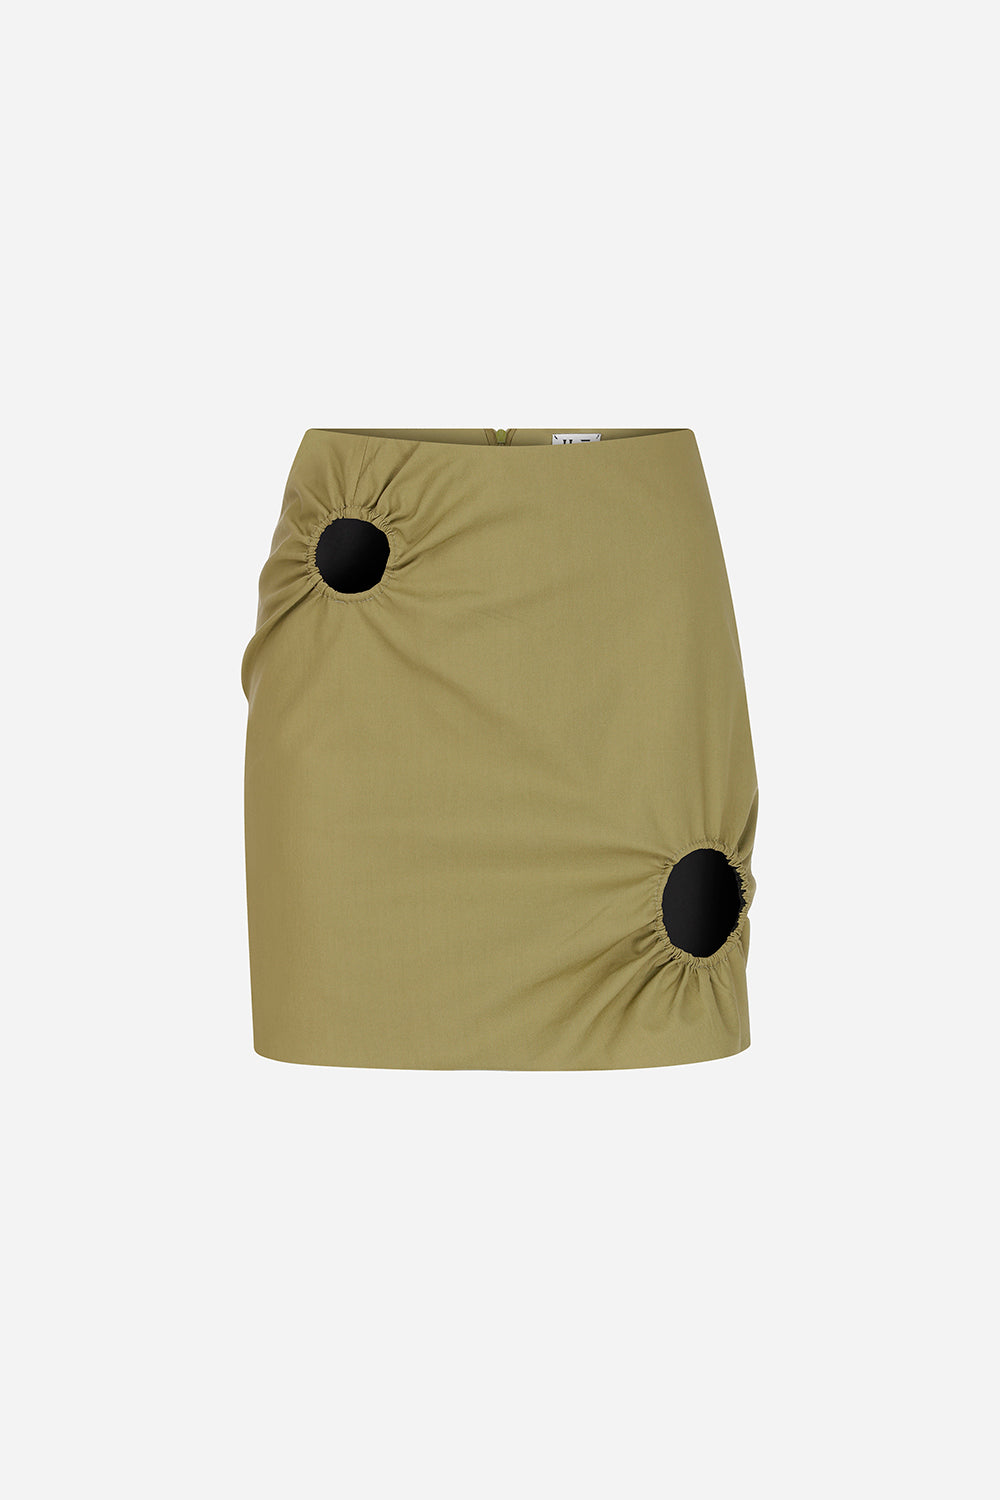 Pavla - Mini Skirt With 2 Ring Cut-Outs